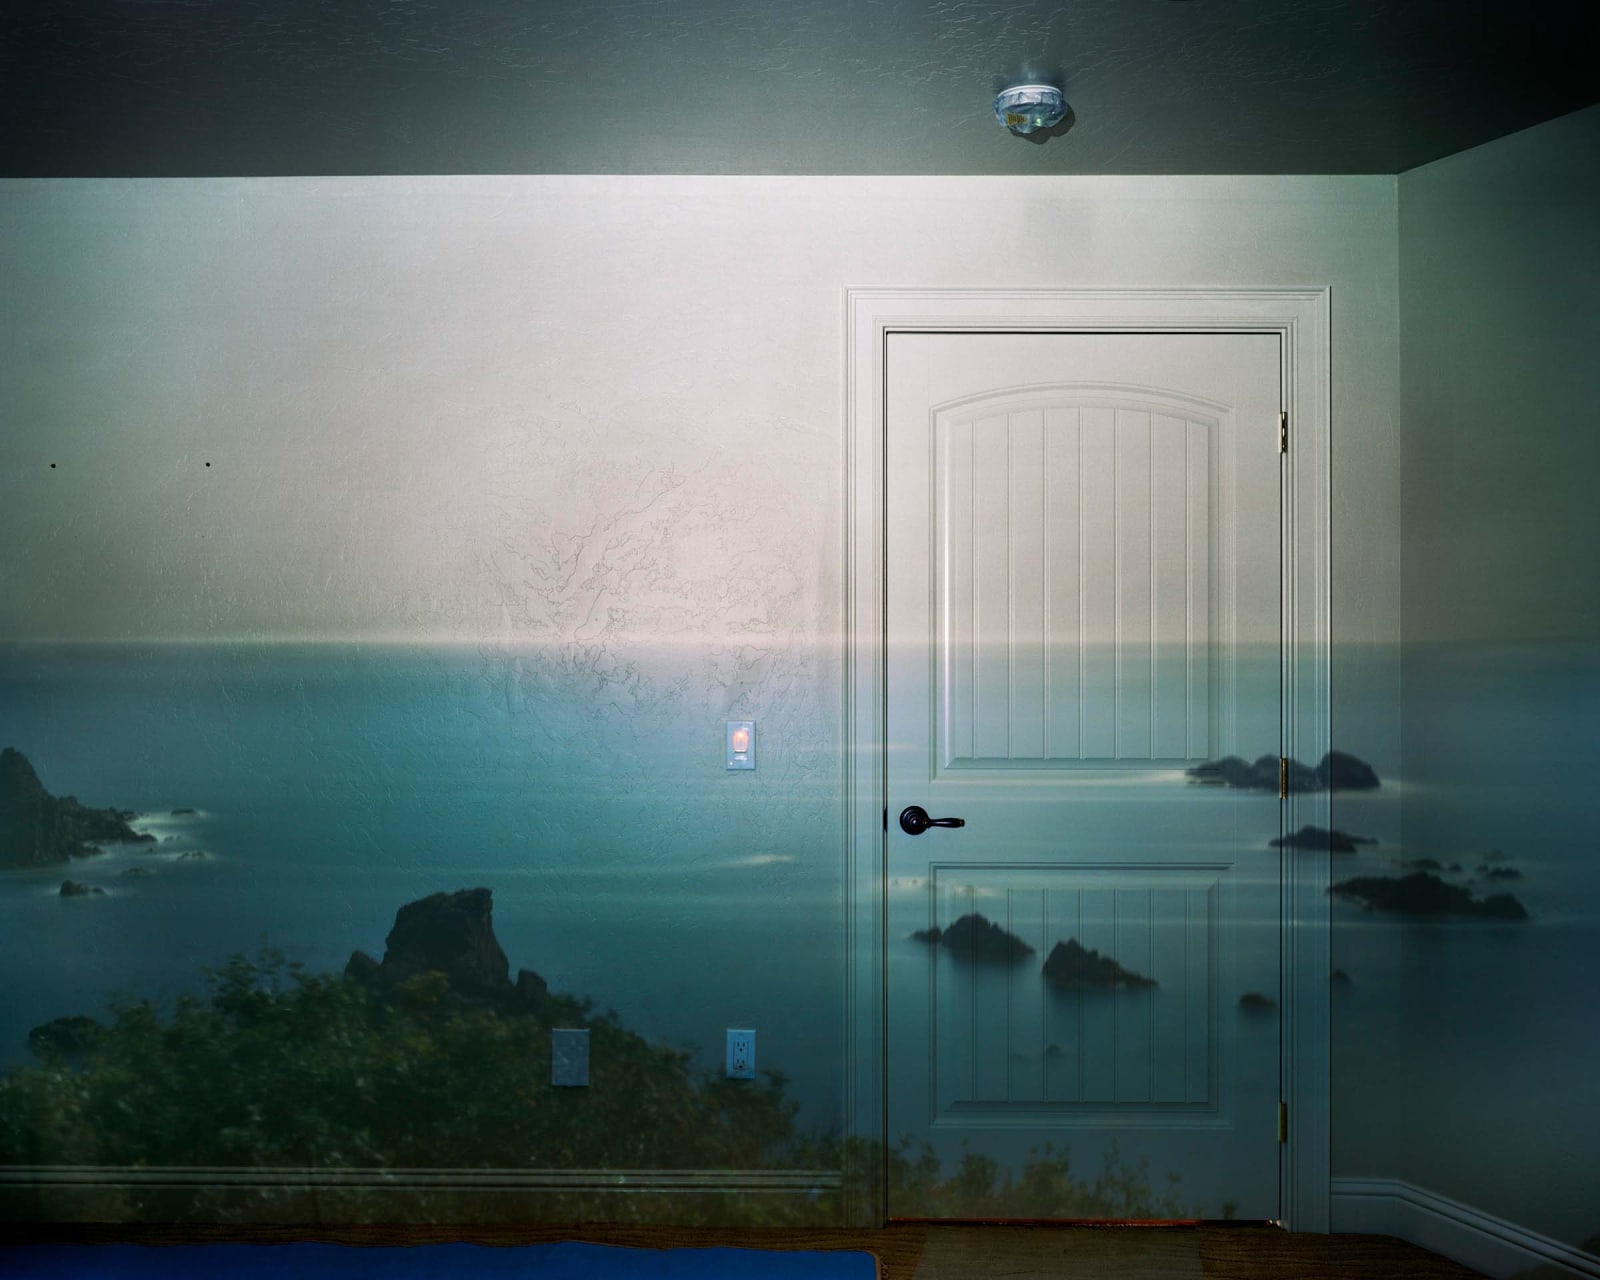 Abelardo Morell, Camera Obscura: Afternoon Light on the Pacific Ocean, Brookings, Oregon, July 13th, 2009